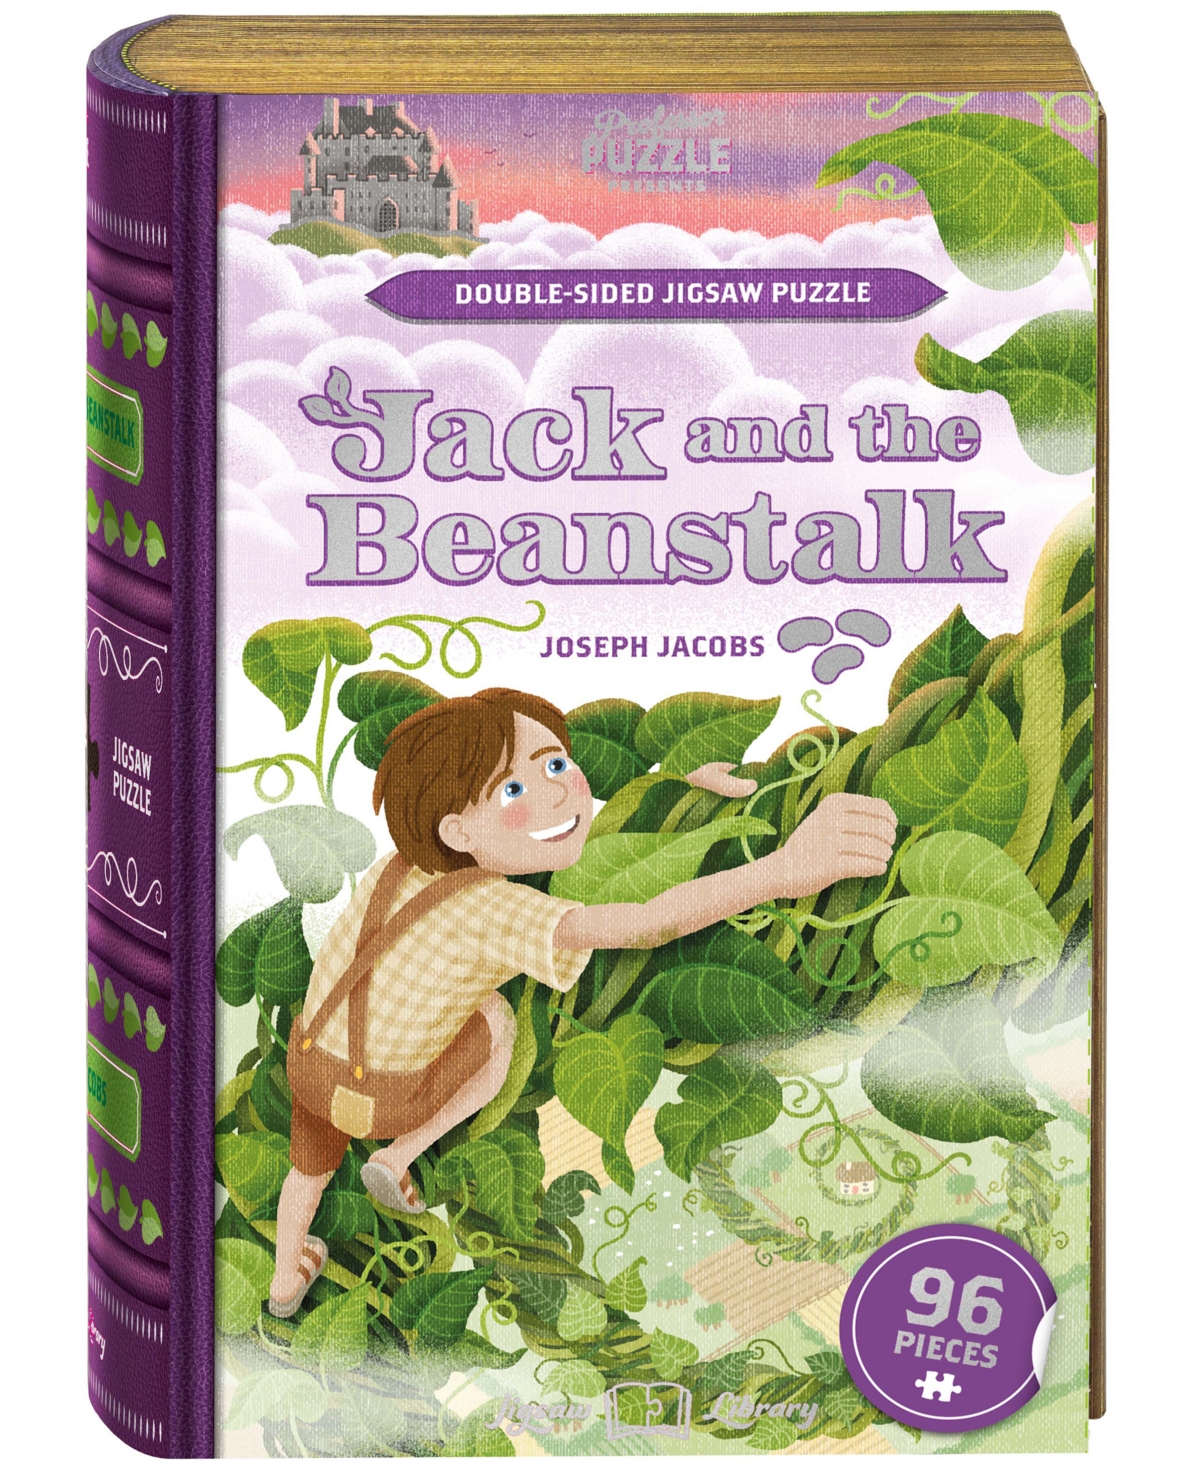 University Games Professor Puzzle Joseph Jacobs' Jack And The Beanstalk Double-sided Jigsaw Puzzle, 96 Pieces In No Color